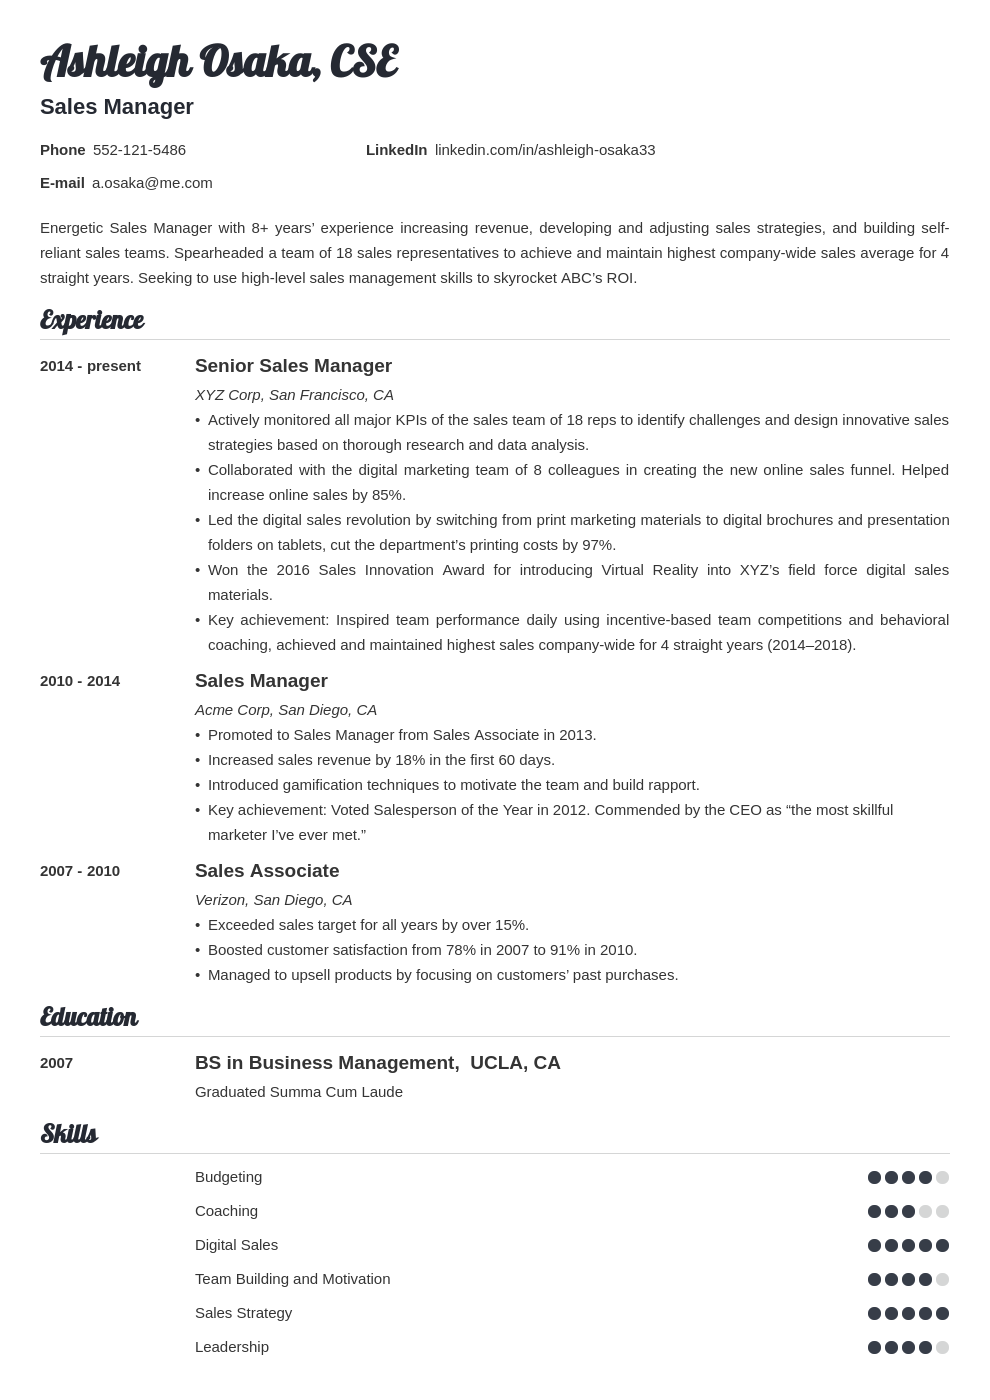 Manager Resume Examples & Templates for Management Positions